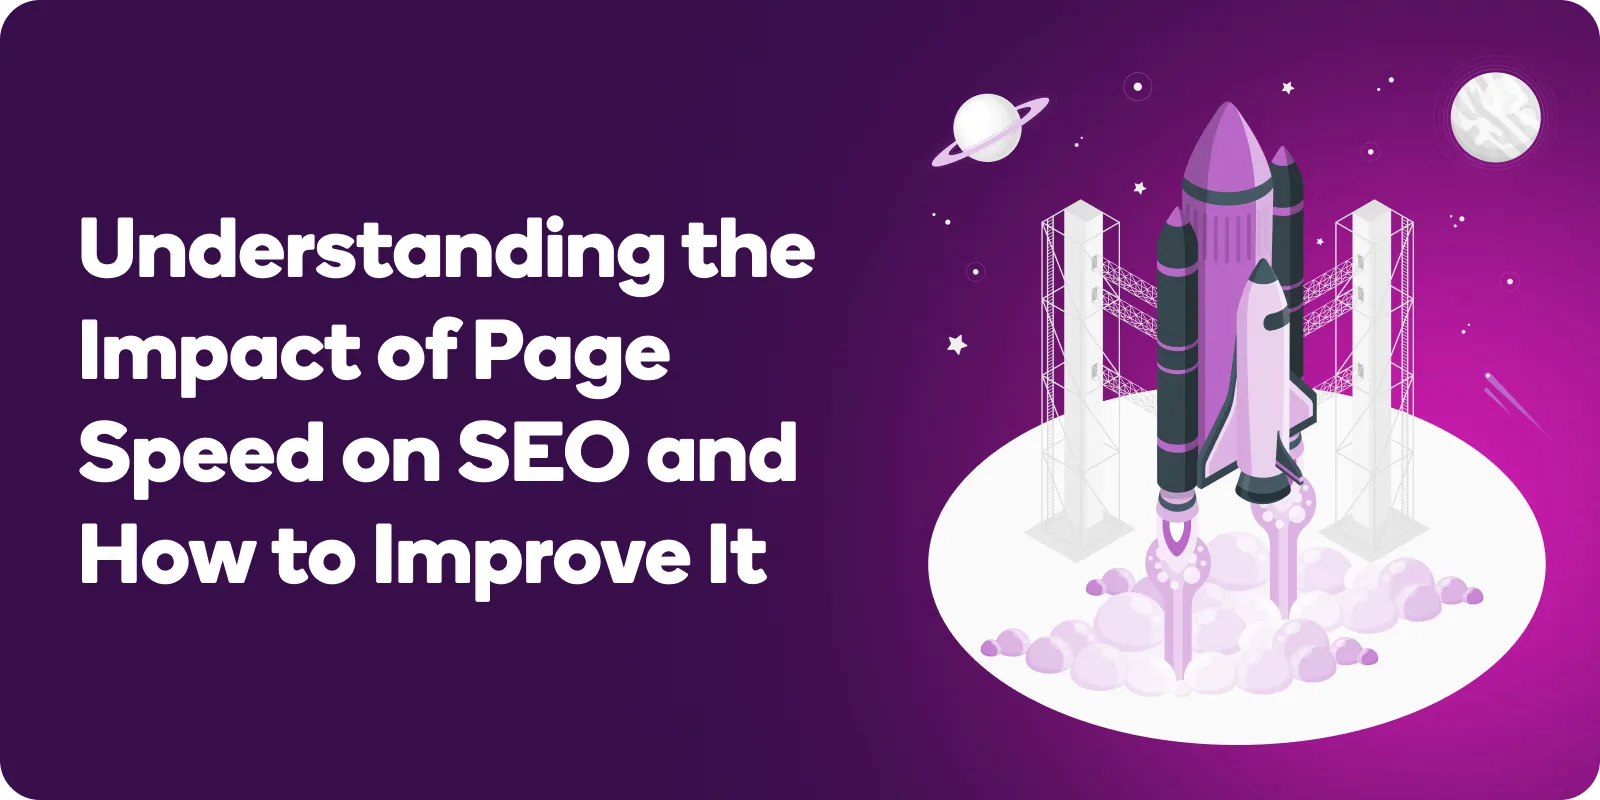 Understanding the Impact of Page Speed on SEO and How to Improve It